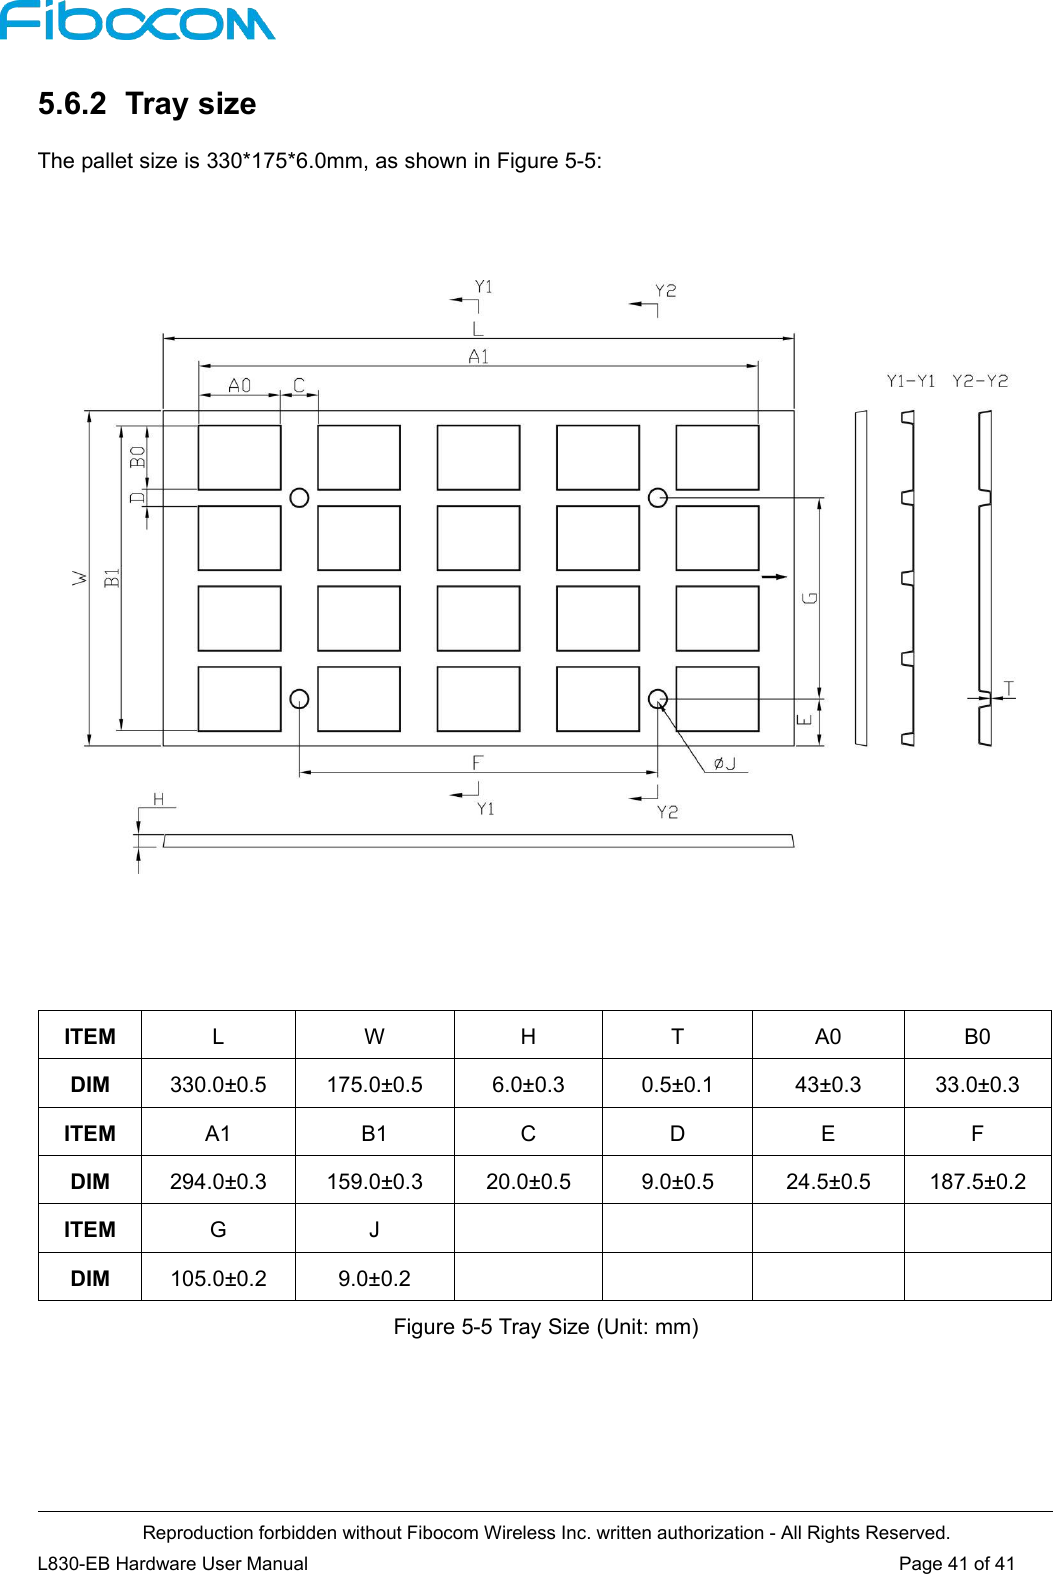 Reproduction forbidden without Fibocom Wireless Inc. written authorization - All Rights Reserved.L830-EB Hardware User Manual Page 41 of 415.6.2 Tray sizeThe pallet size is 330*175*6.0mm, as shown in Figure 5-5:ITEM L W H T A0 B0DIM 330.0±0.5 175.0±0.5 6.0±0.3 0.5±0.1 43±0.3 33.0±0.3ITEM A1 B1 C D E FDIM 294.0±0.3 159.0±0.3 20.0±0.5 9.0±0.5 24.5±0.5 187.5±0.2ITEM G JDIM 105.0±0.2 9.0±0.2Figure 5-5 Tray Size (Unit: mm)